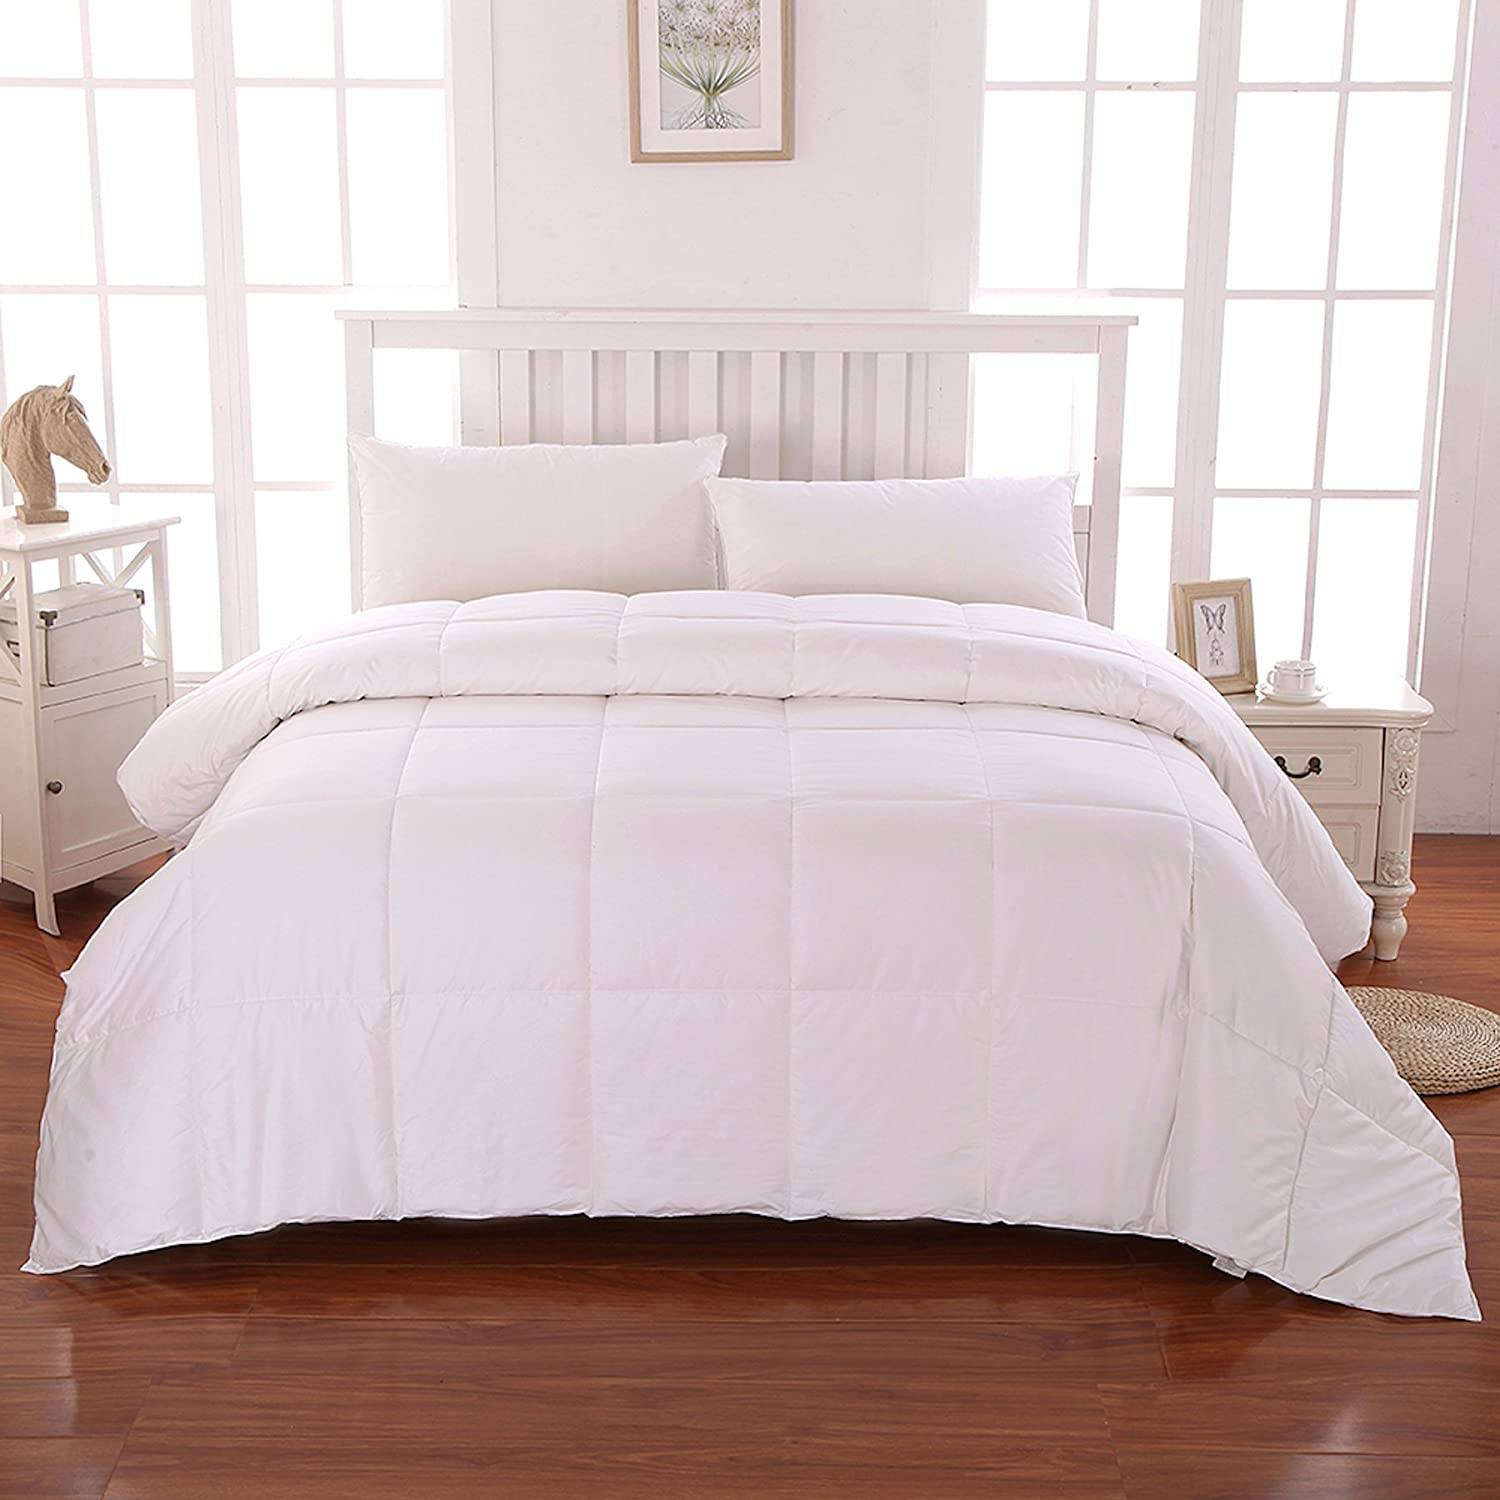 Best Down Alternative Comforters from Amazon Reviews 2020 The Sleep Judge